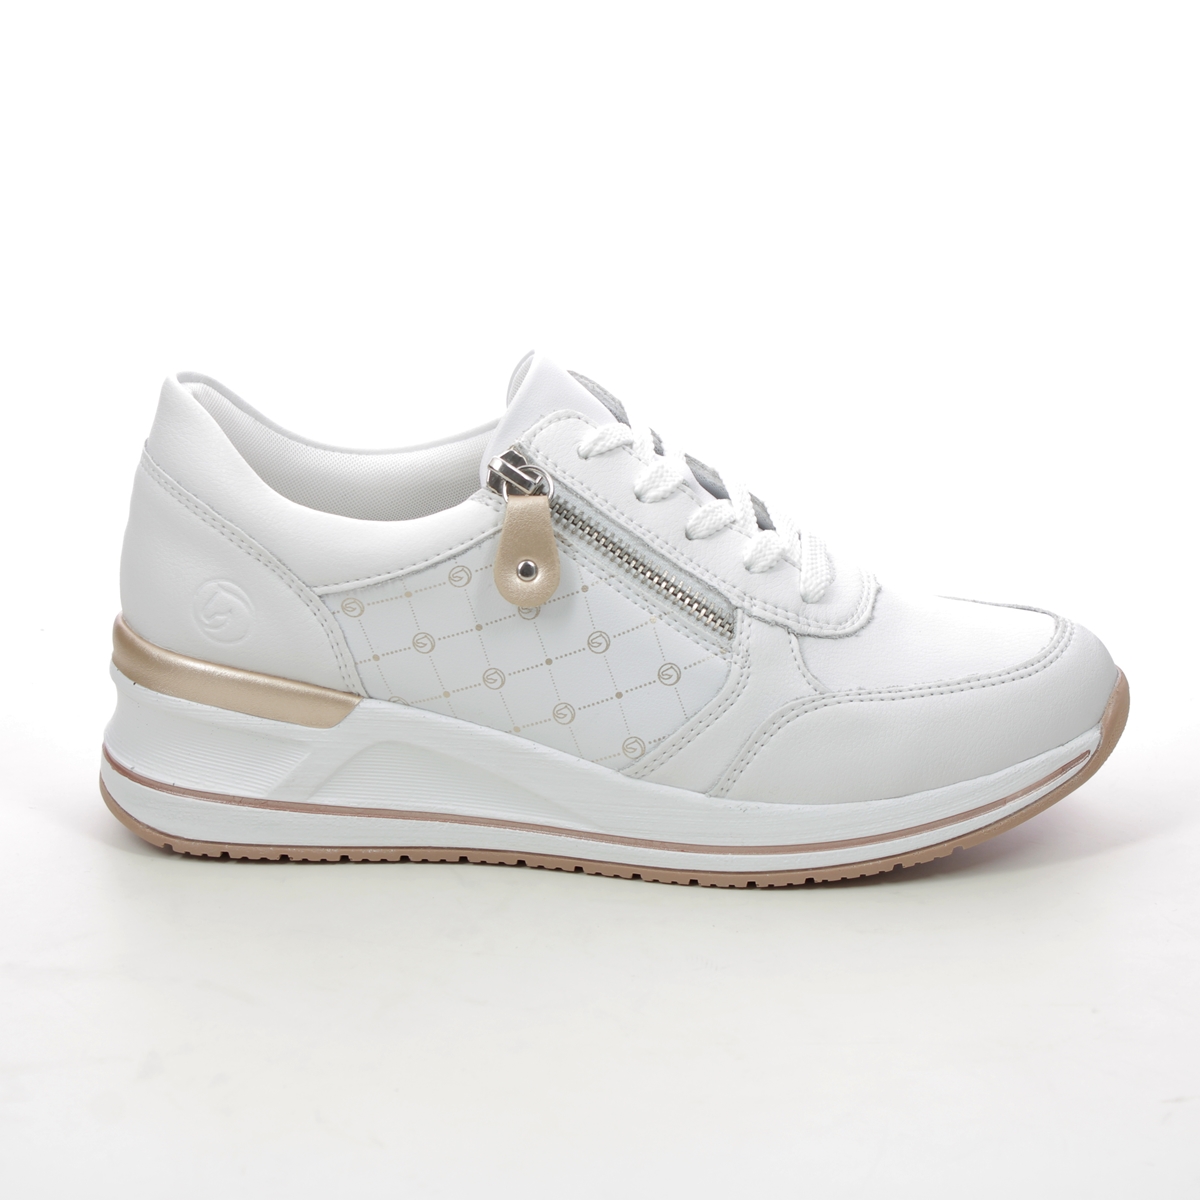 Remonte D3211-80 Sea Wedge Zip White Rose gold Womens trainers